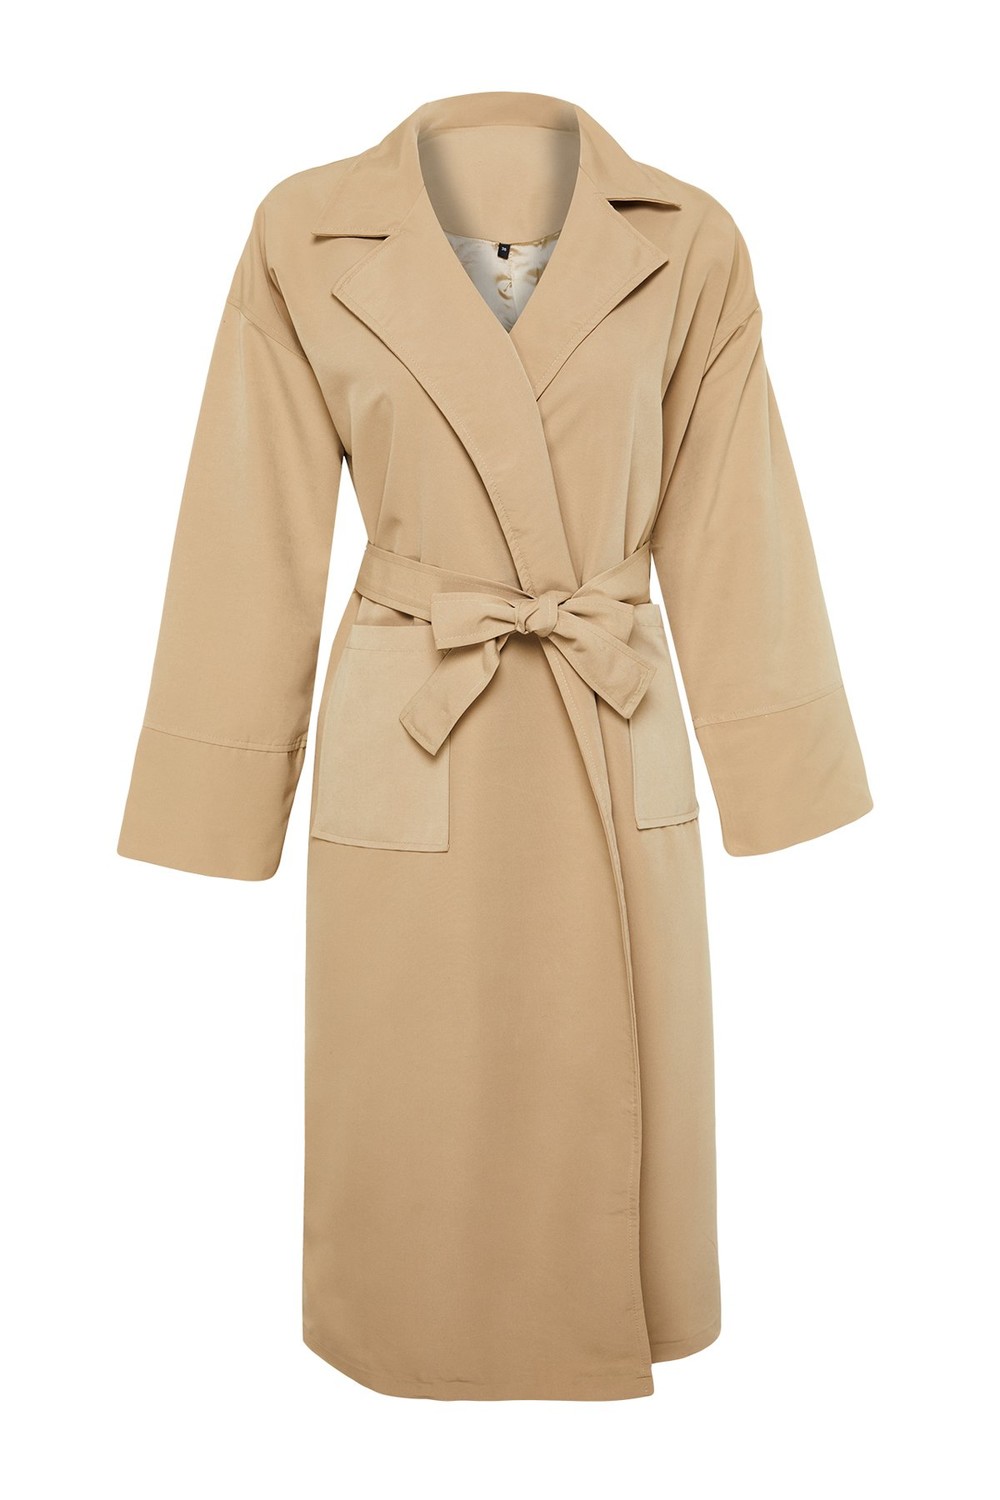 Trendyol Beige Oversize Wide Cut Trench Coat with a Belt, Detailed Sleeves and Pockets, Water-repellent Long Trench Coat